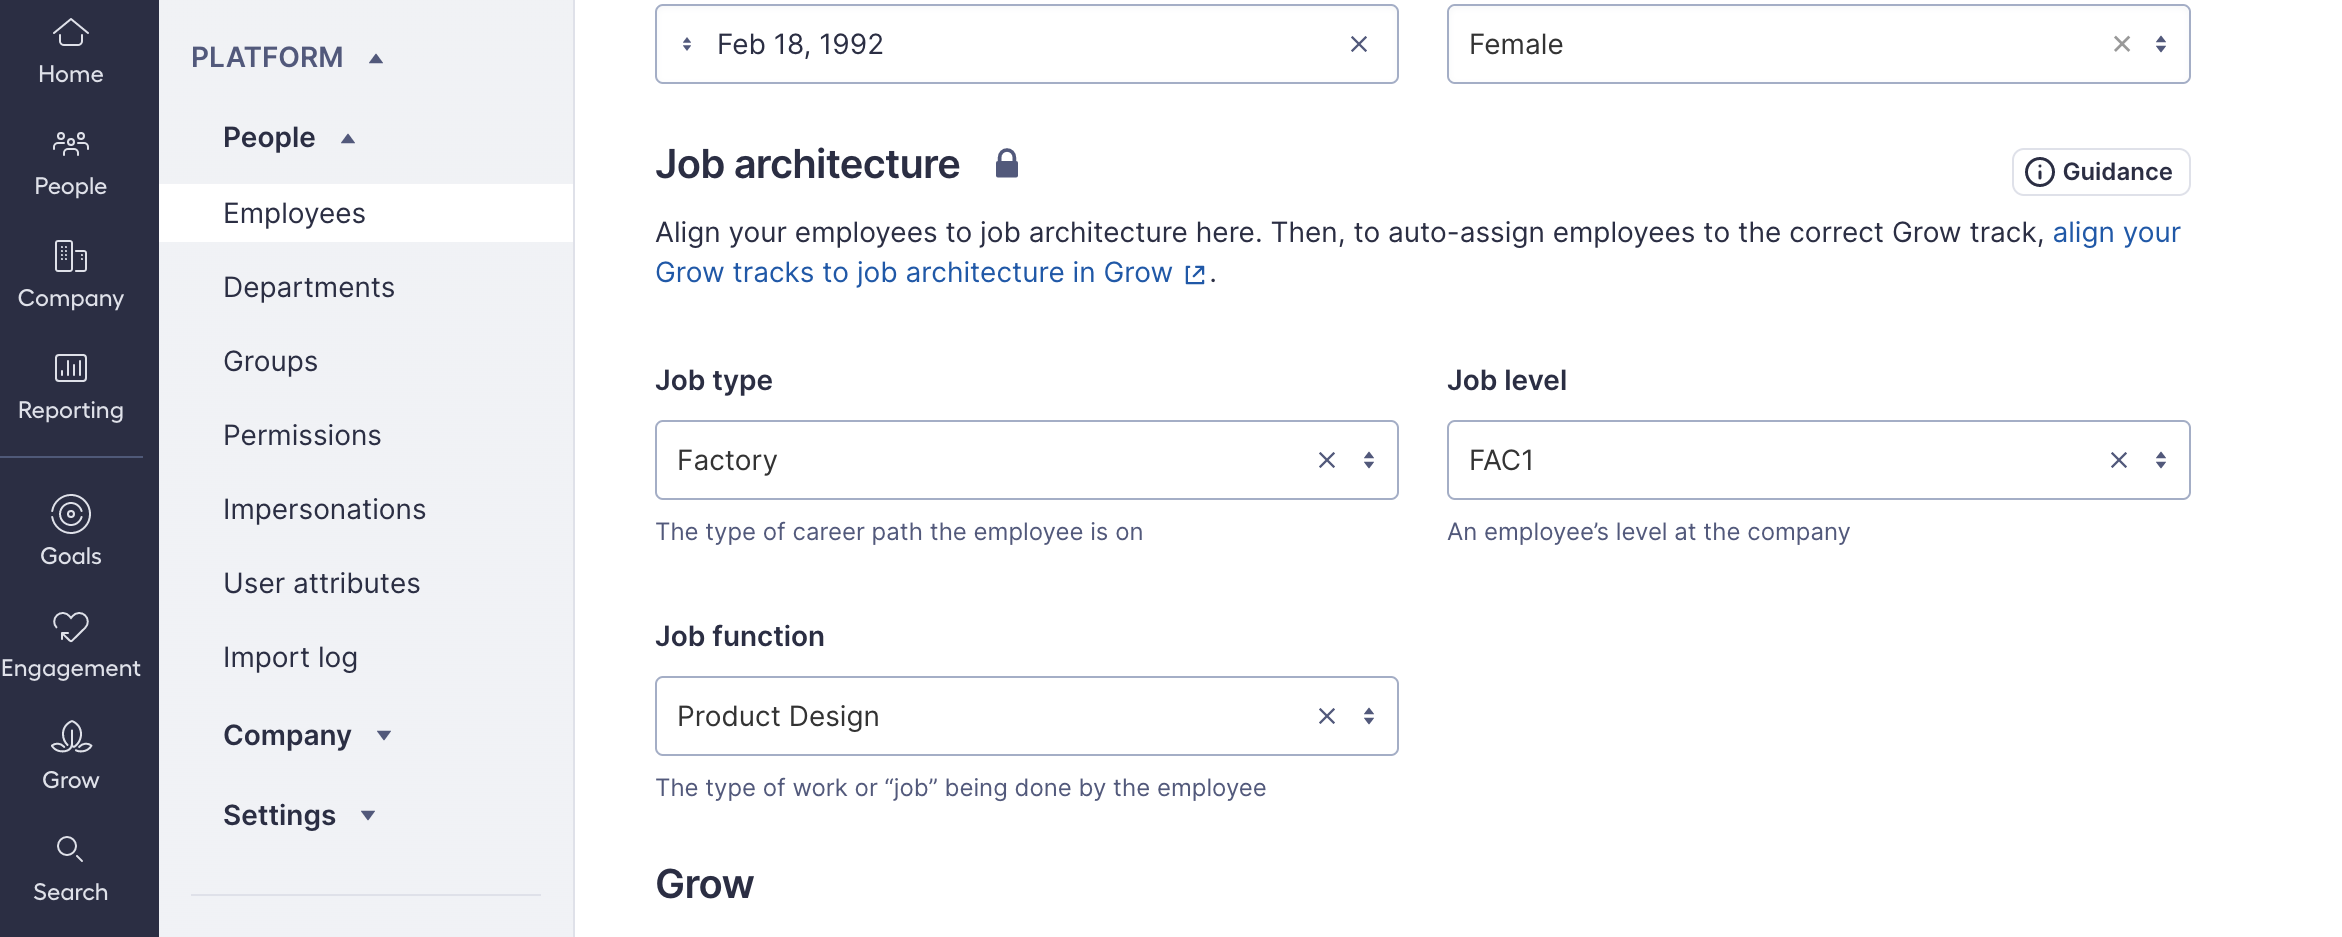 Image of Lattice employee profile with job architecture and its values highlighted